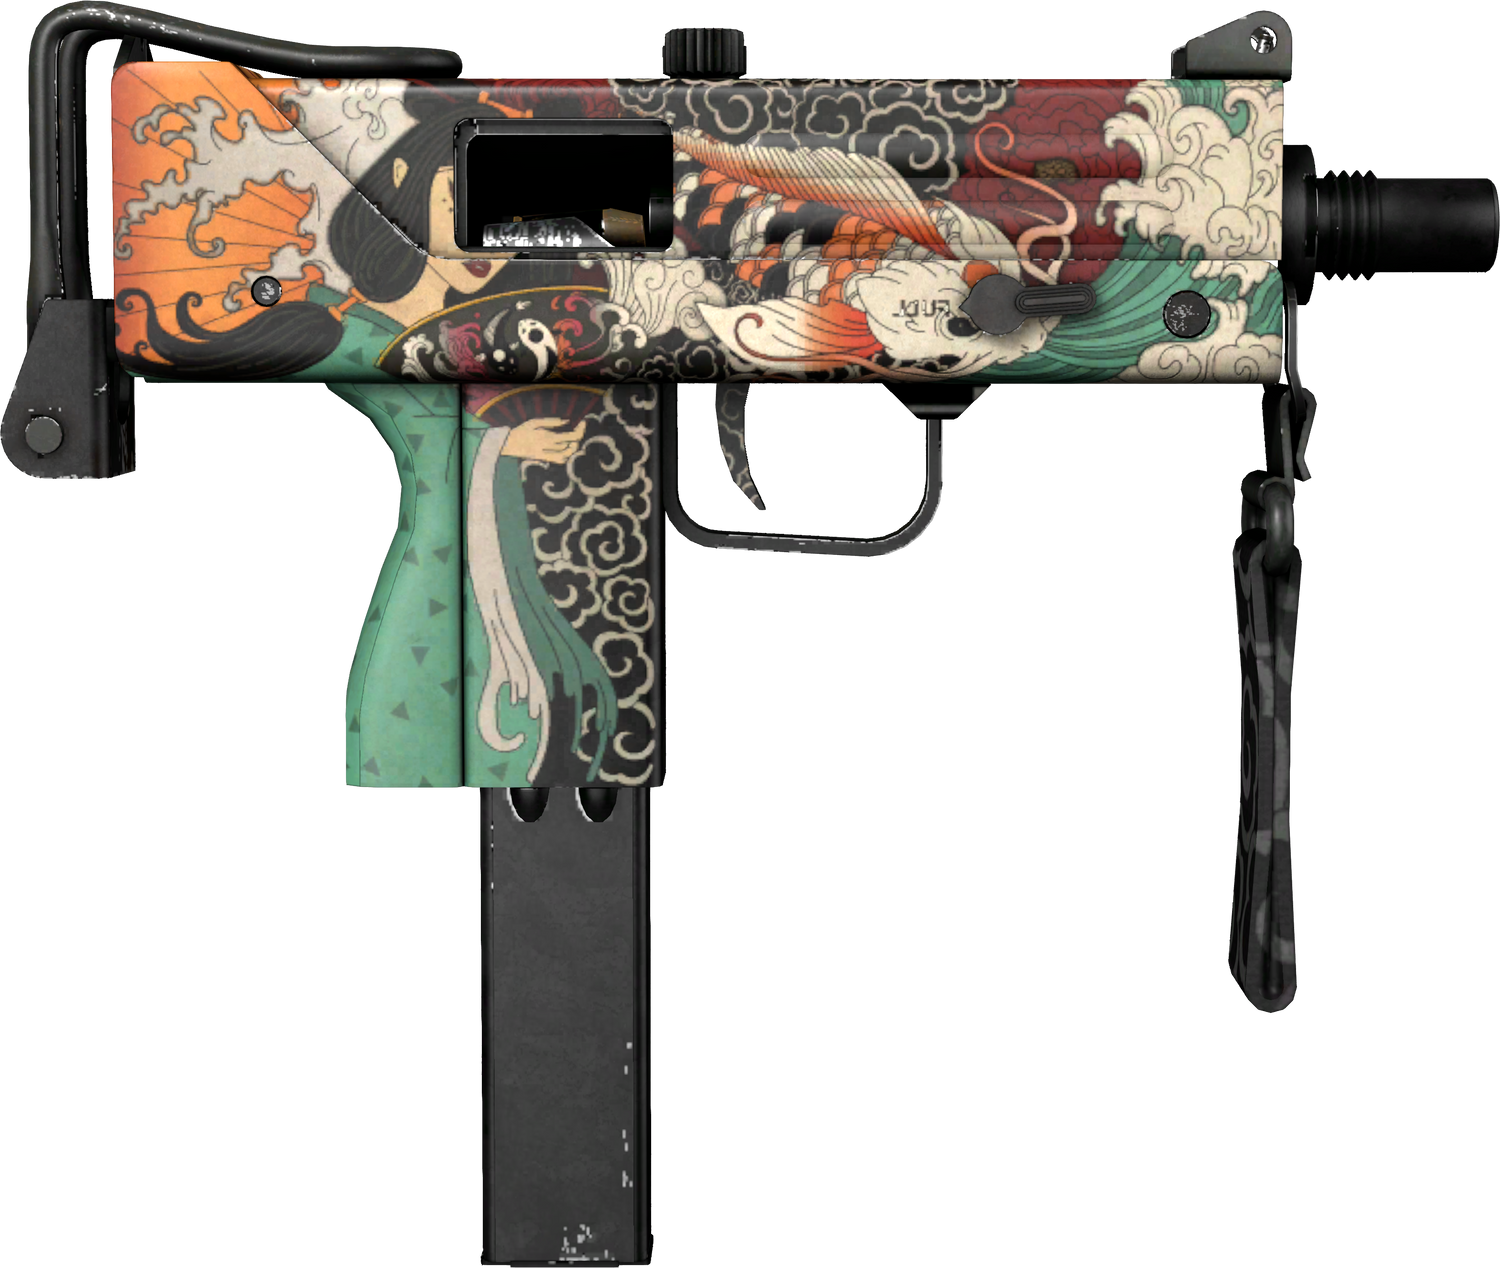 instal the new version for apple MAC-10 Button Masher cs go skin